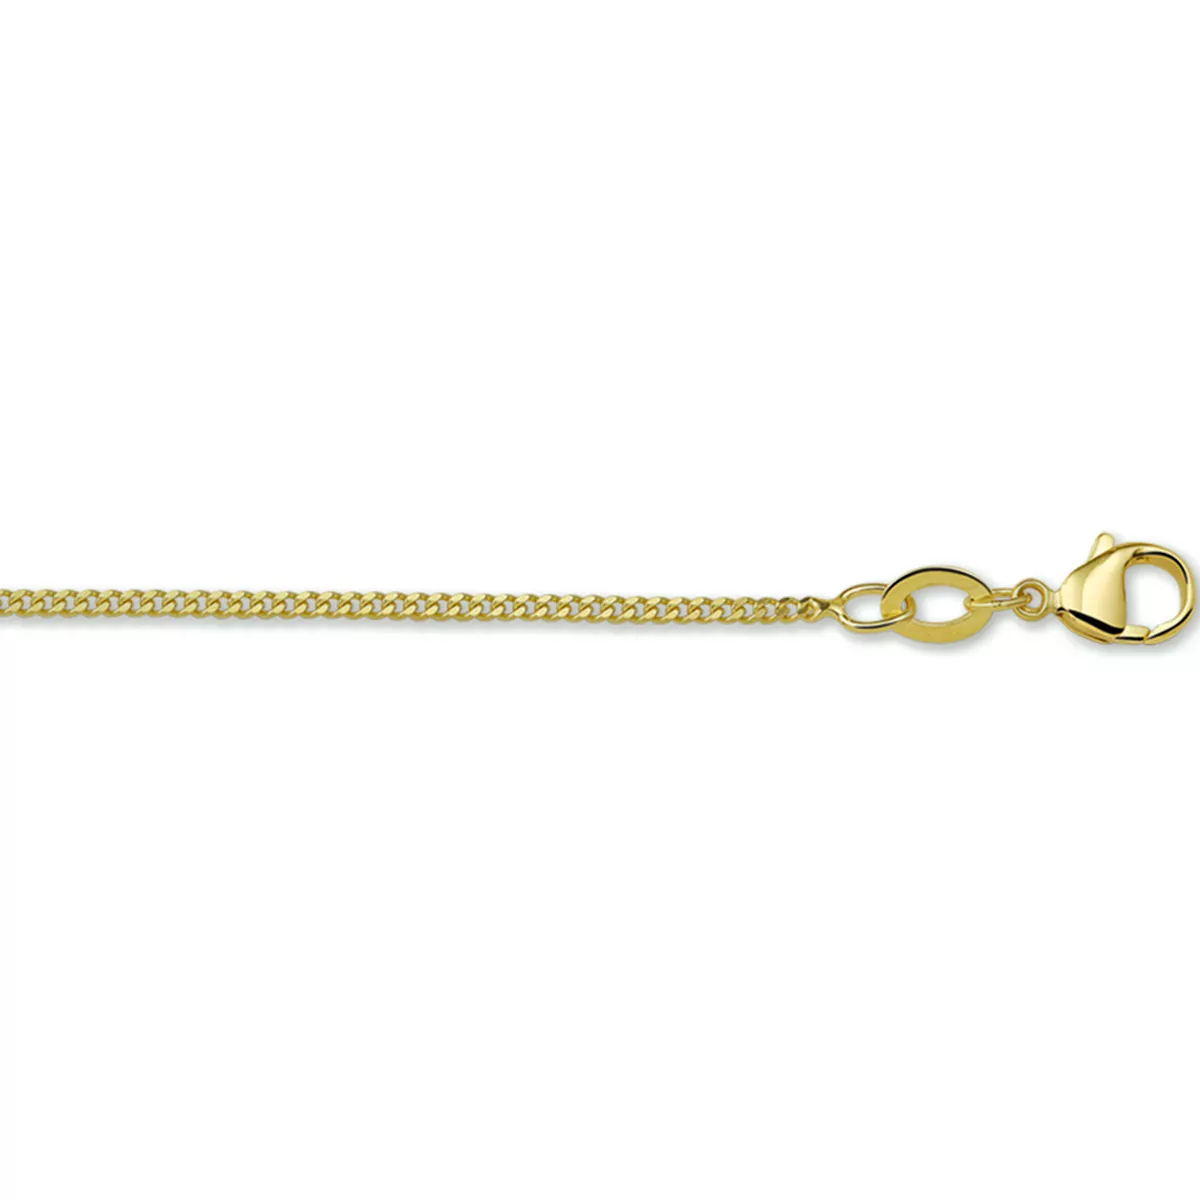 Ketting Doubl Gourmette 1,4 mm